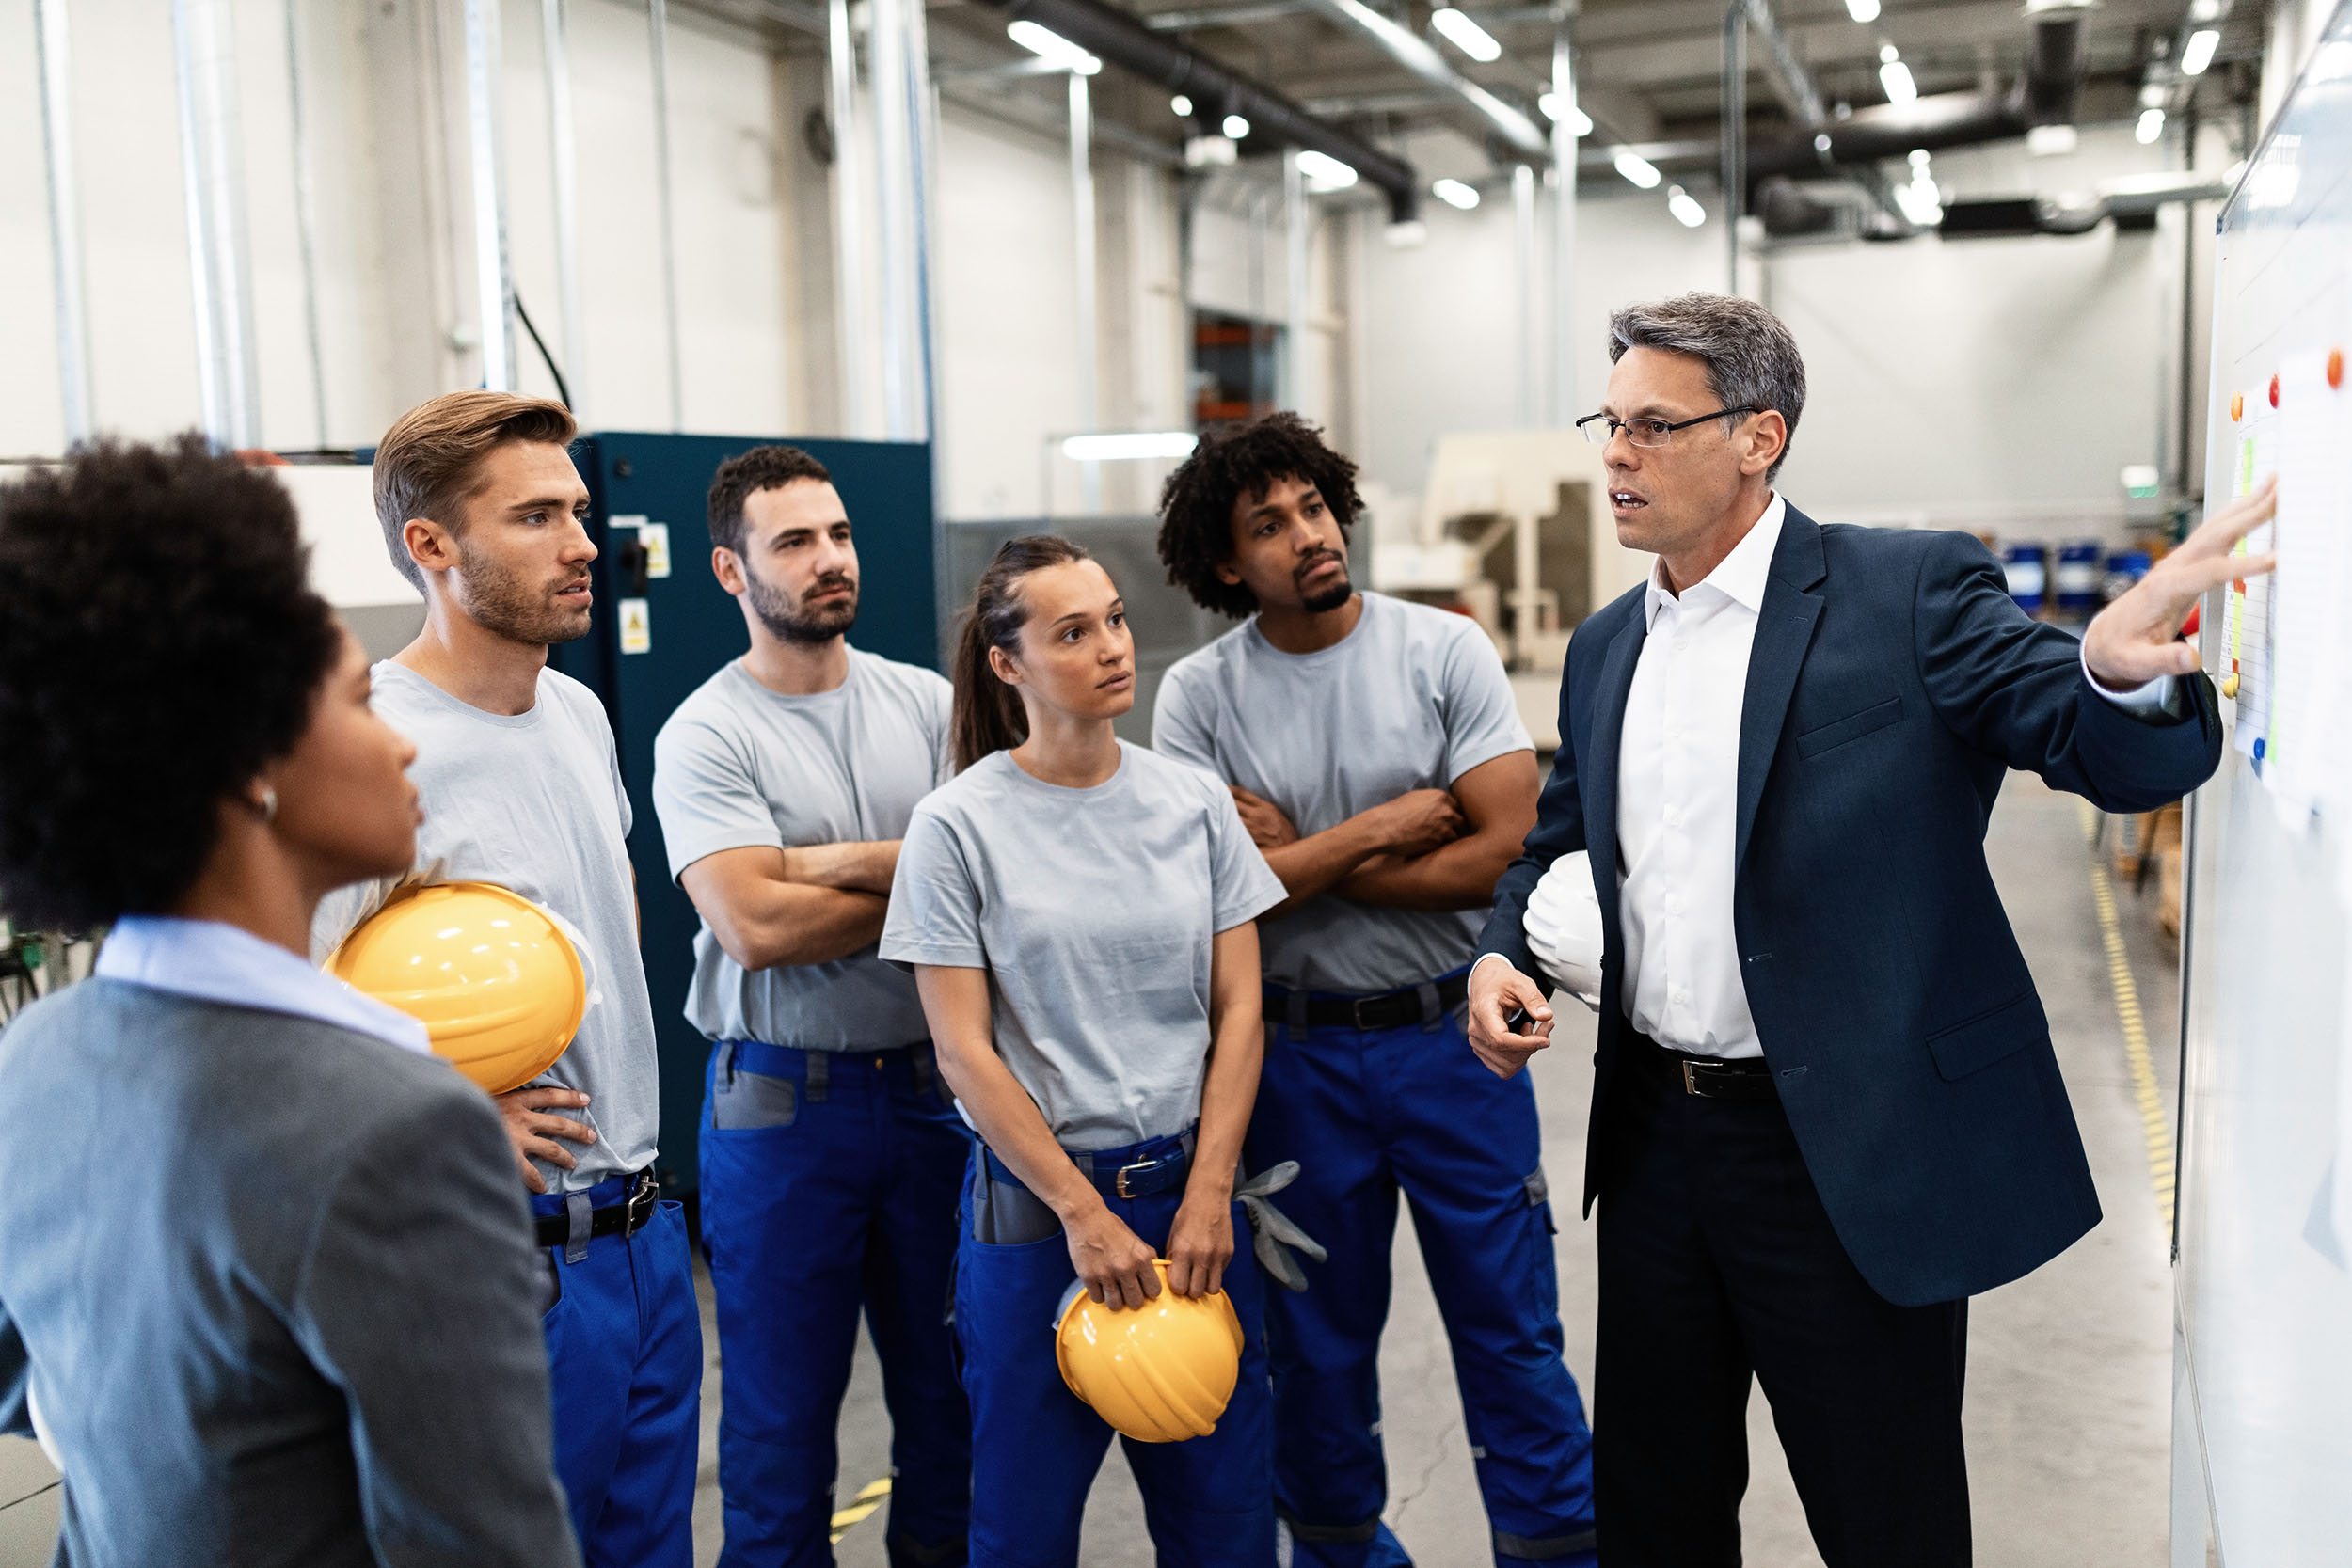 man in suit talking to workers in coveralls and hard hats